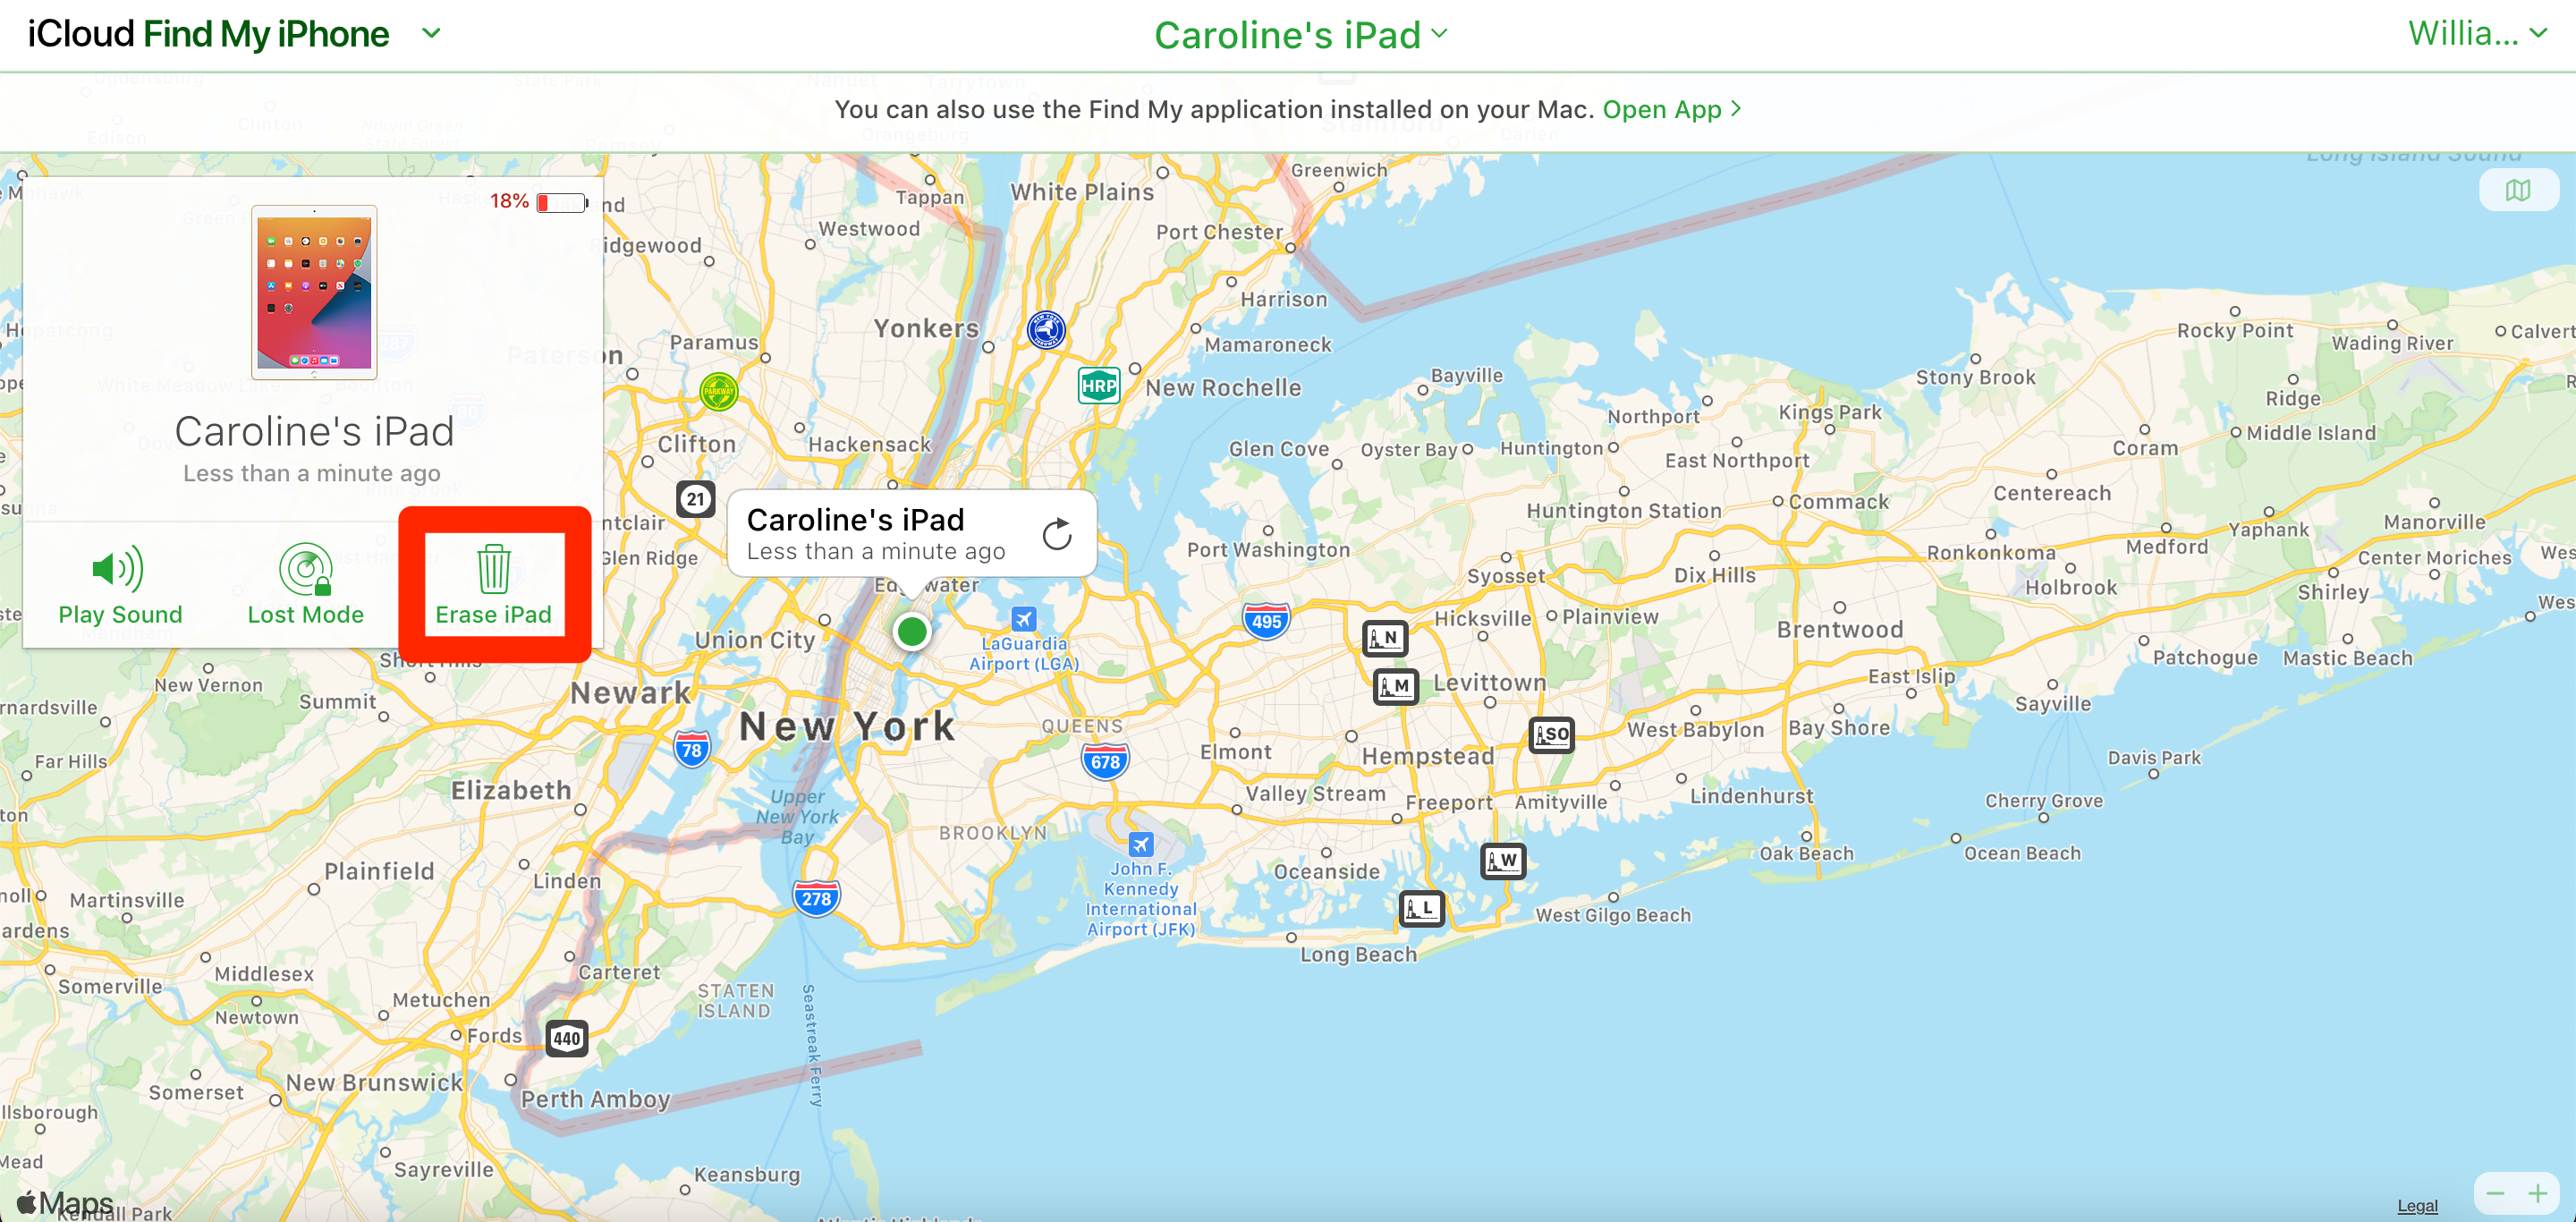 The Find My browser app, displaying a map of New York City and Long Island, with a green dot to mark where the selected iPad is. In a side menu, the "Erase iPad" option is highlighted.